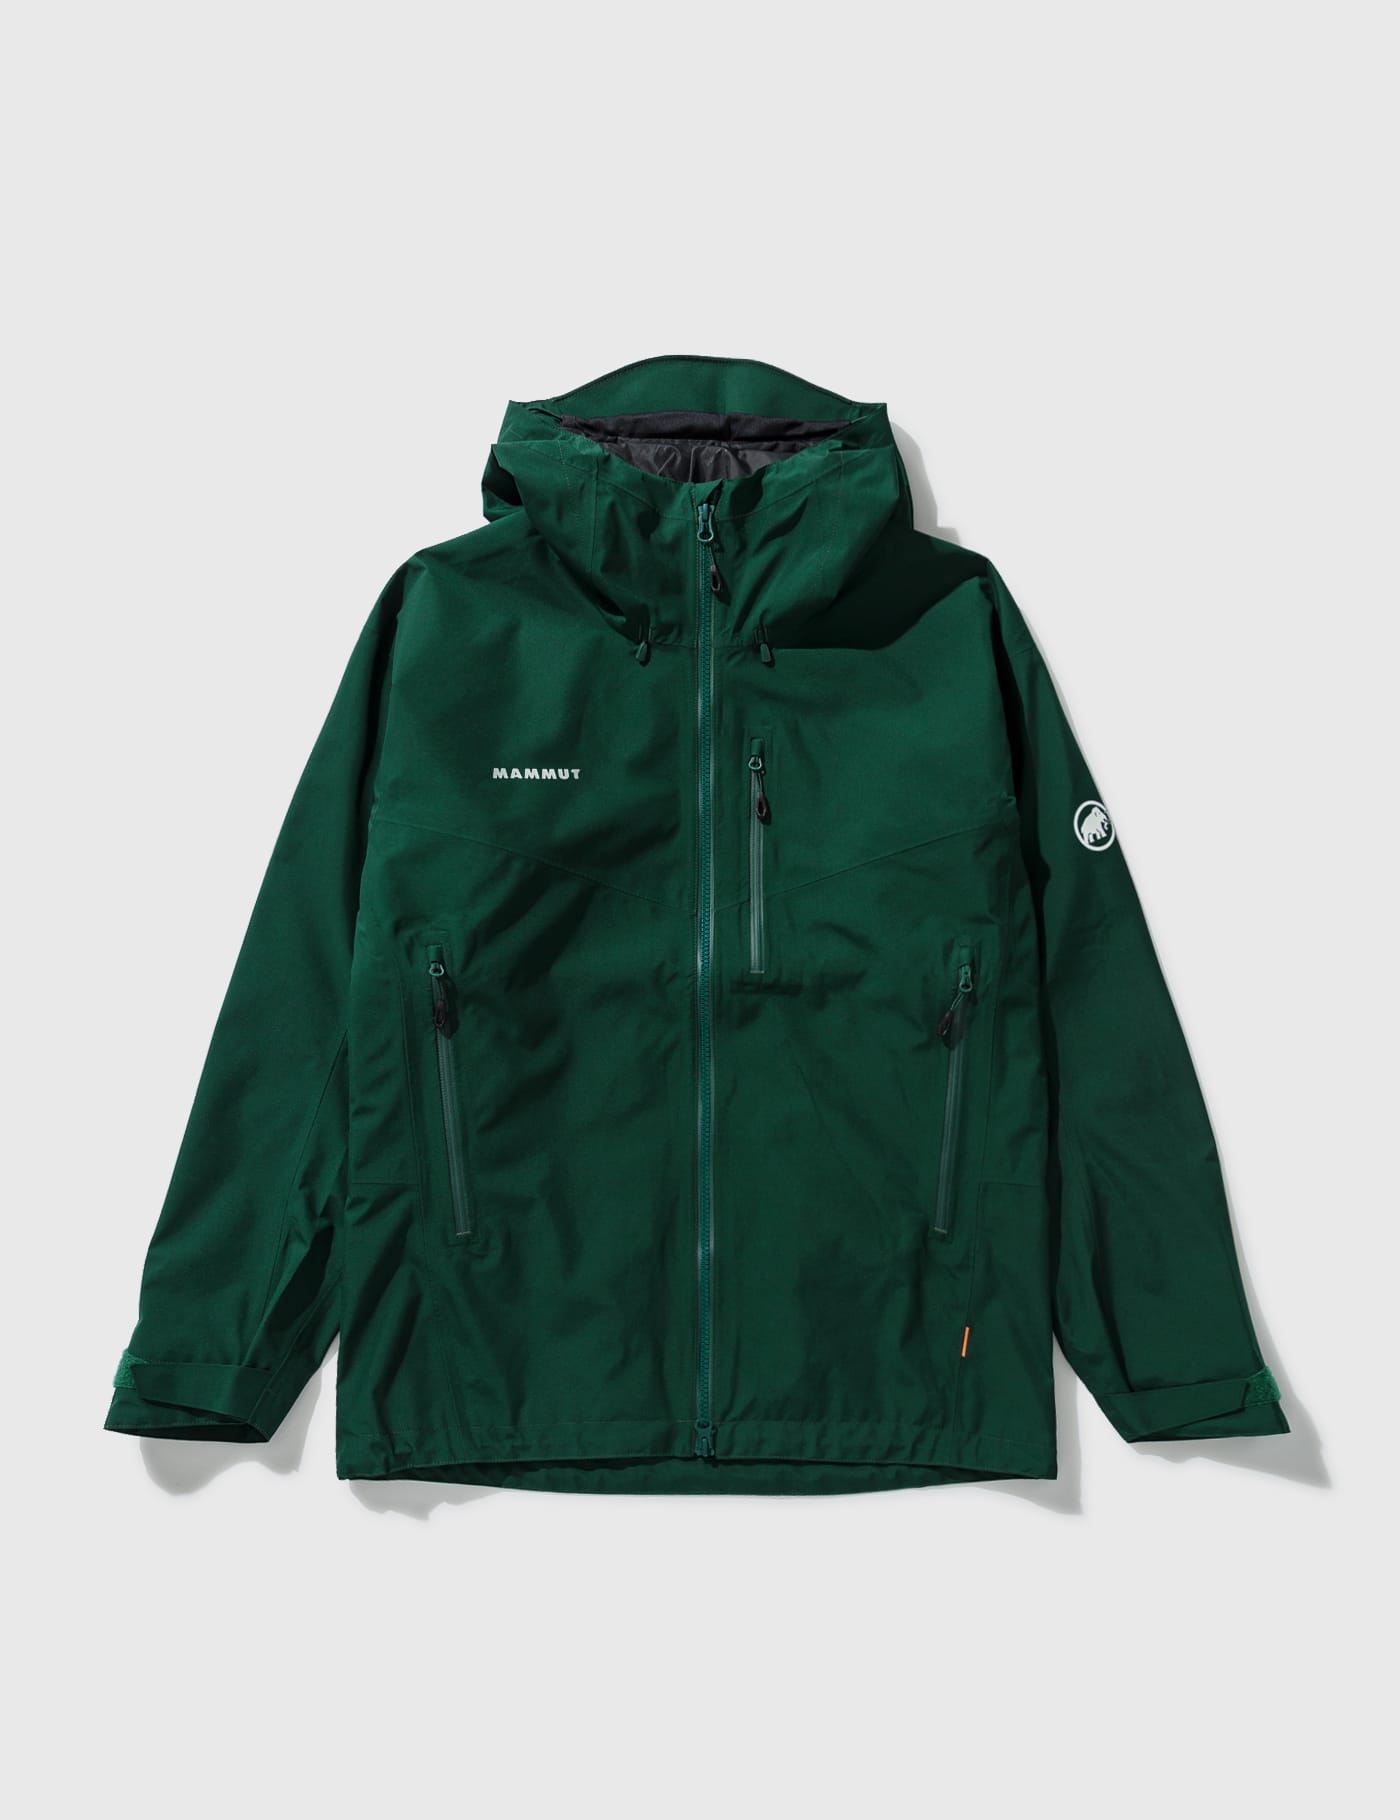 MAMMUT - Ayako Pro Hs Hooded Jacket | HBX - Globally Curated 